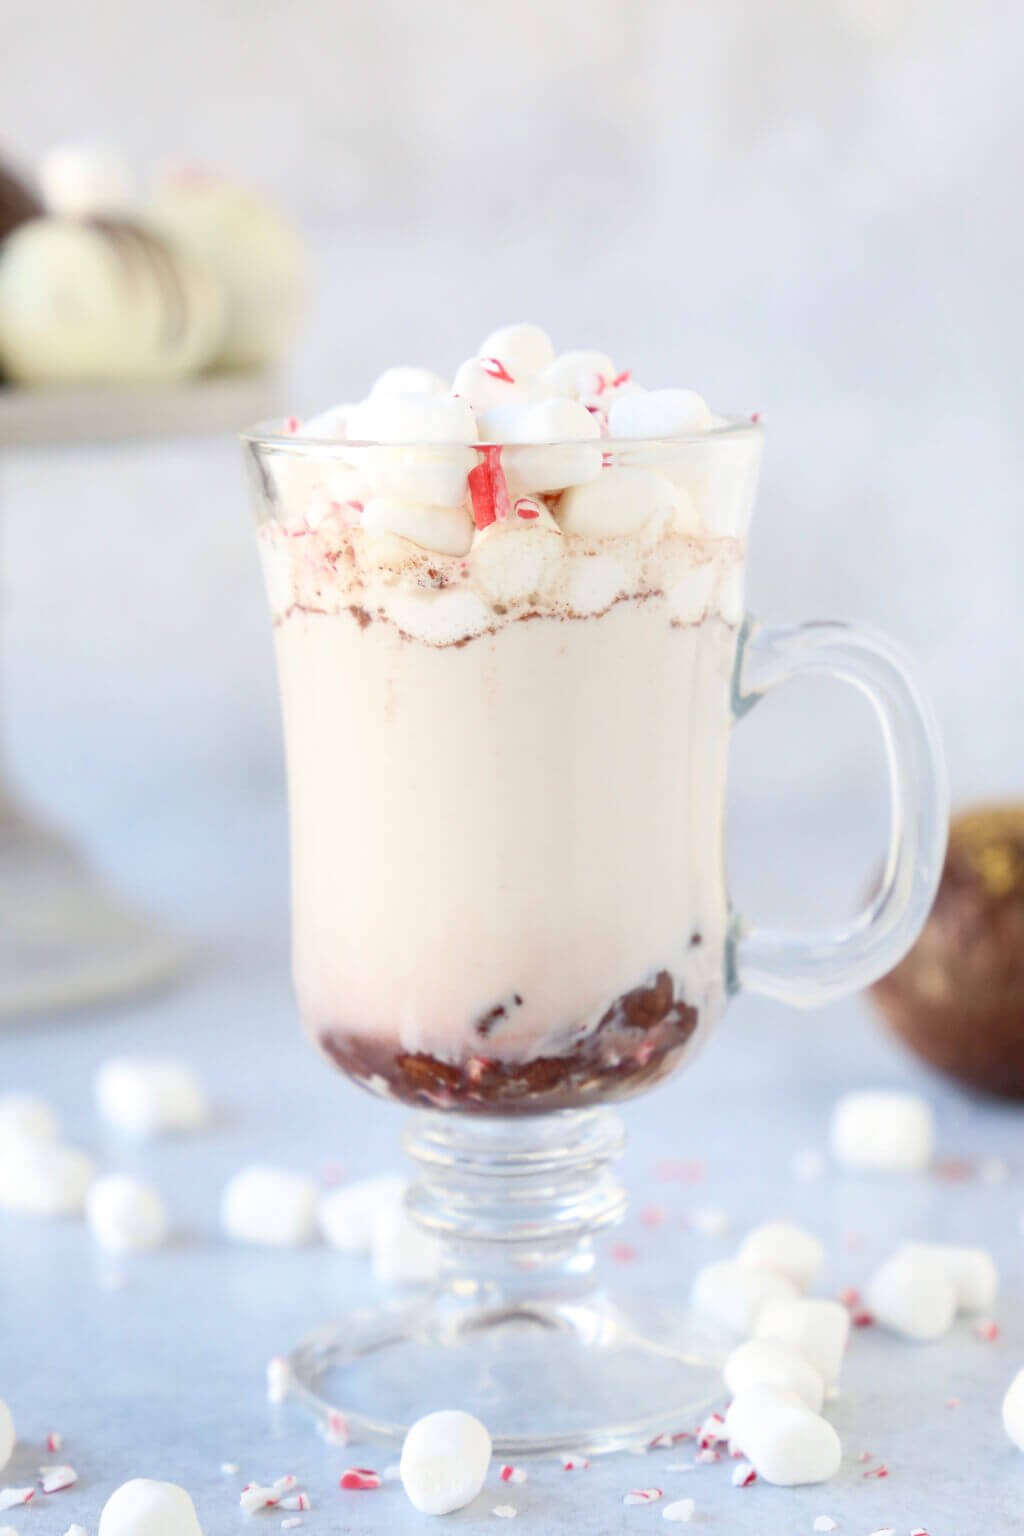 A mug full of hot chocolate topped with marshmallows